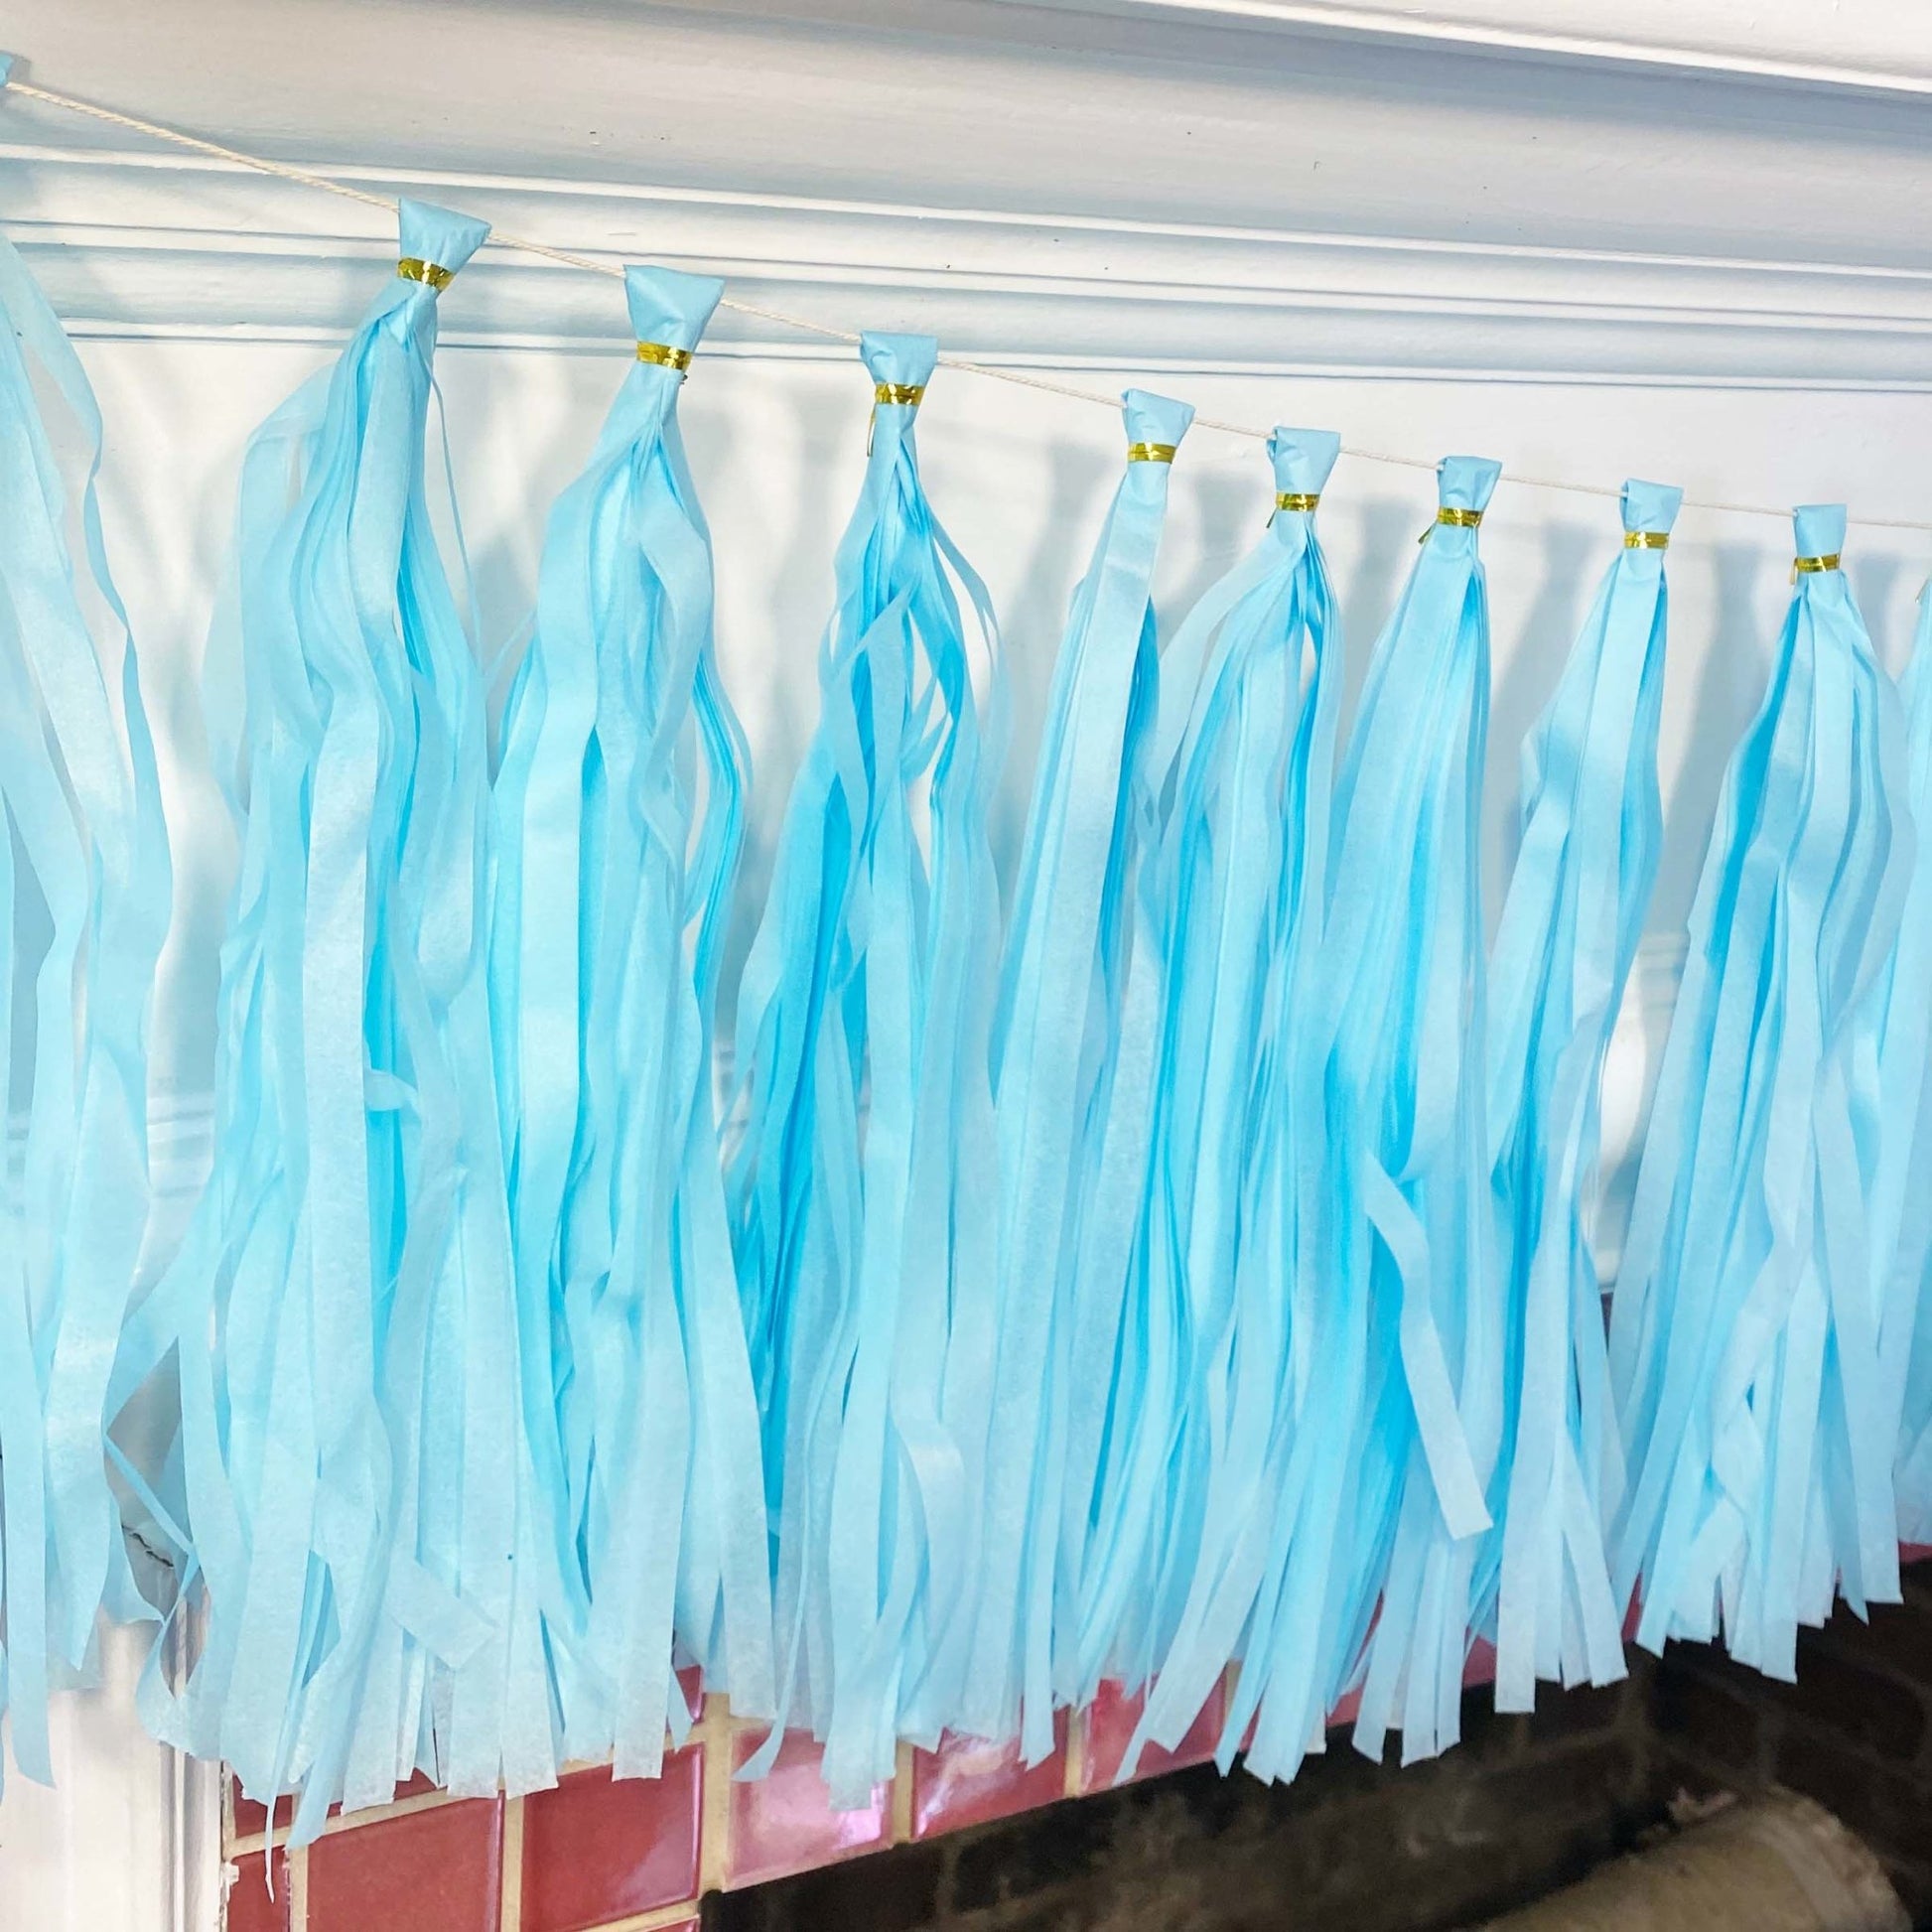 Tassel Tails – Ellie's Party Supply